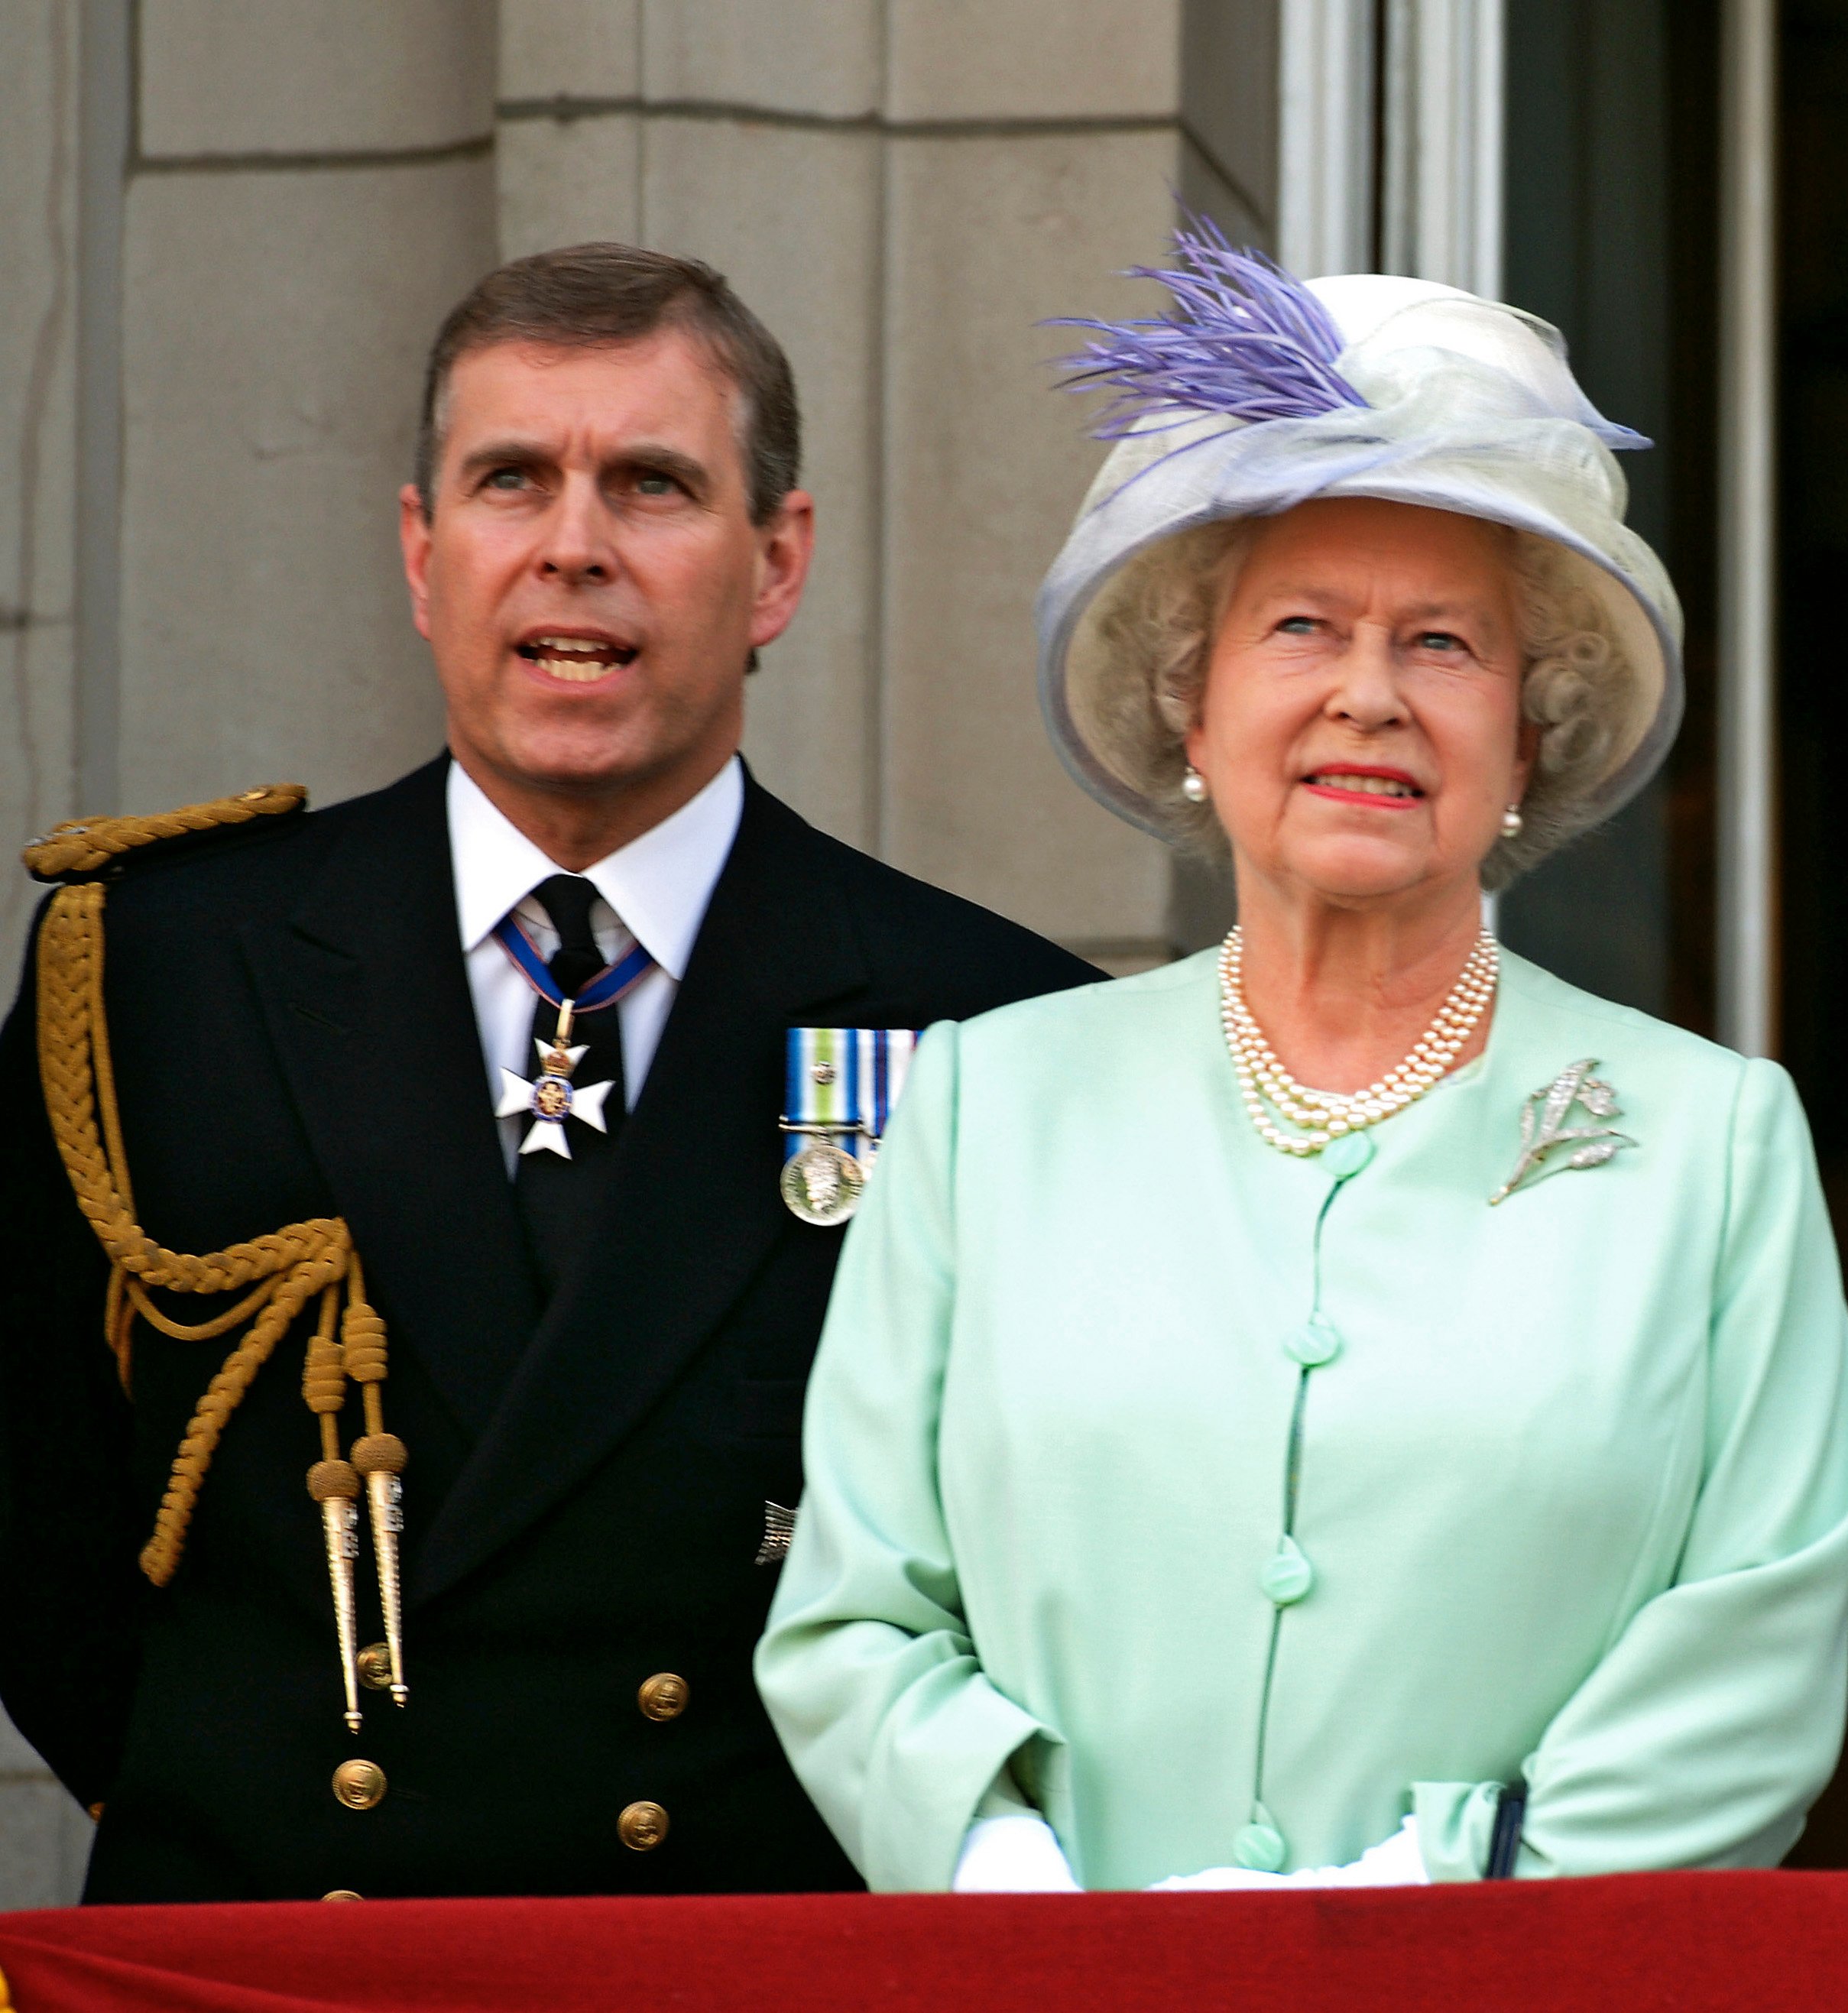 Queen Elizabeth ll and Prince Andrew watch the flypast on the balcony of Buckingham Palace